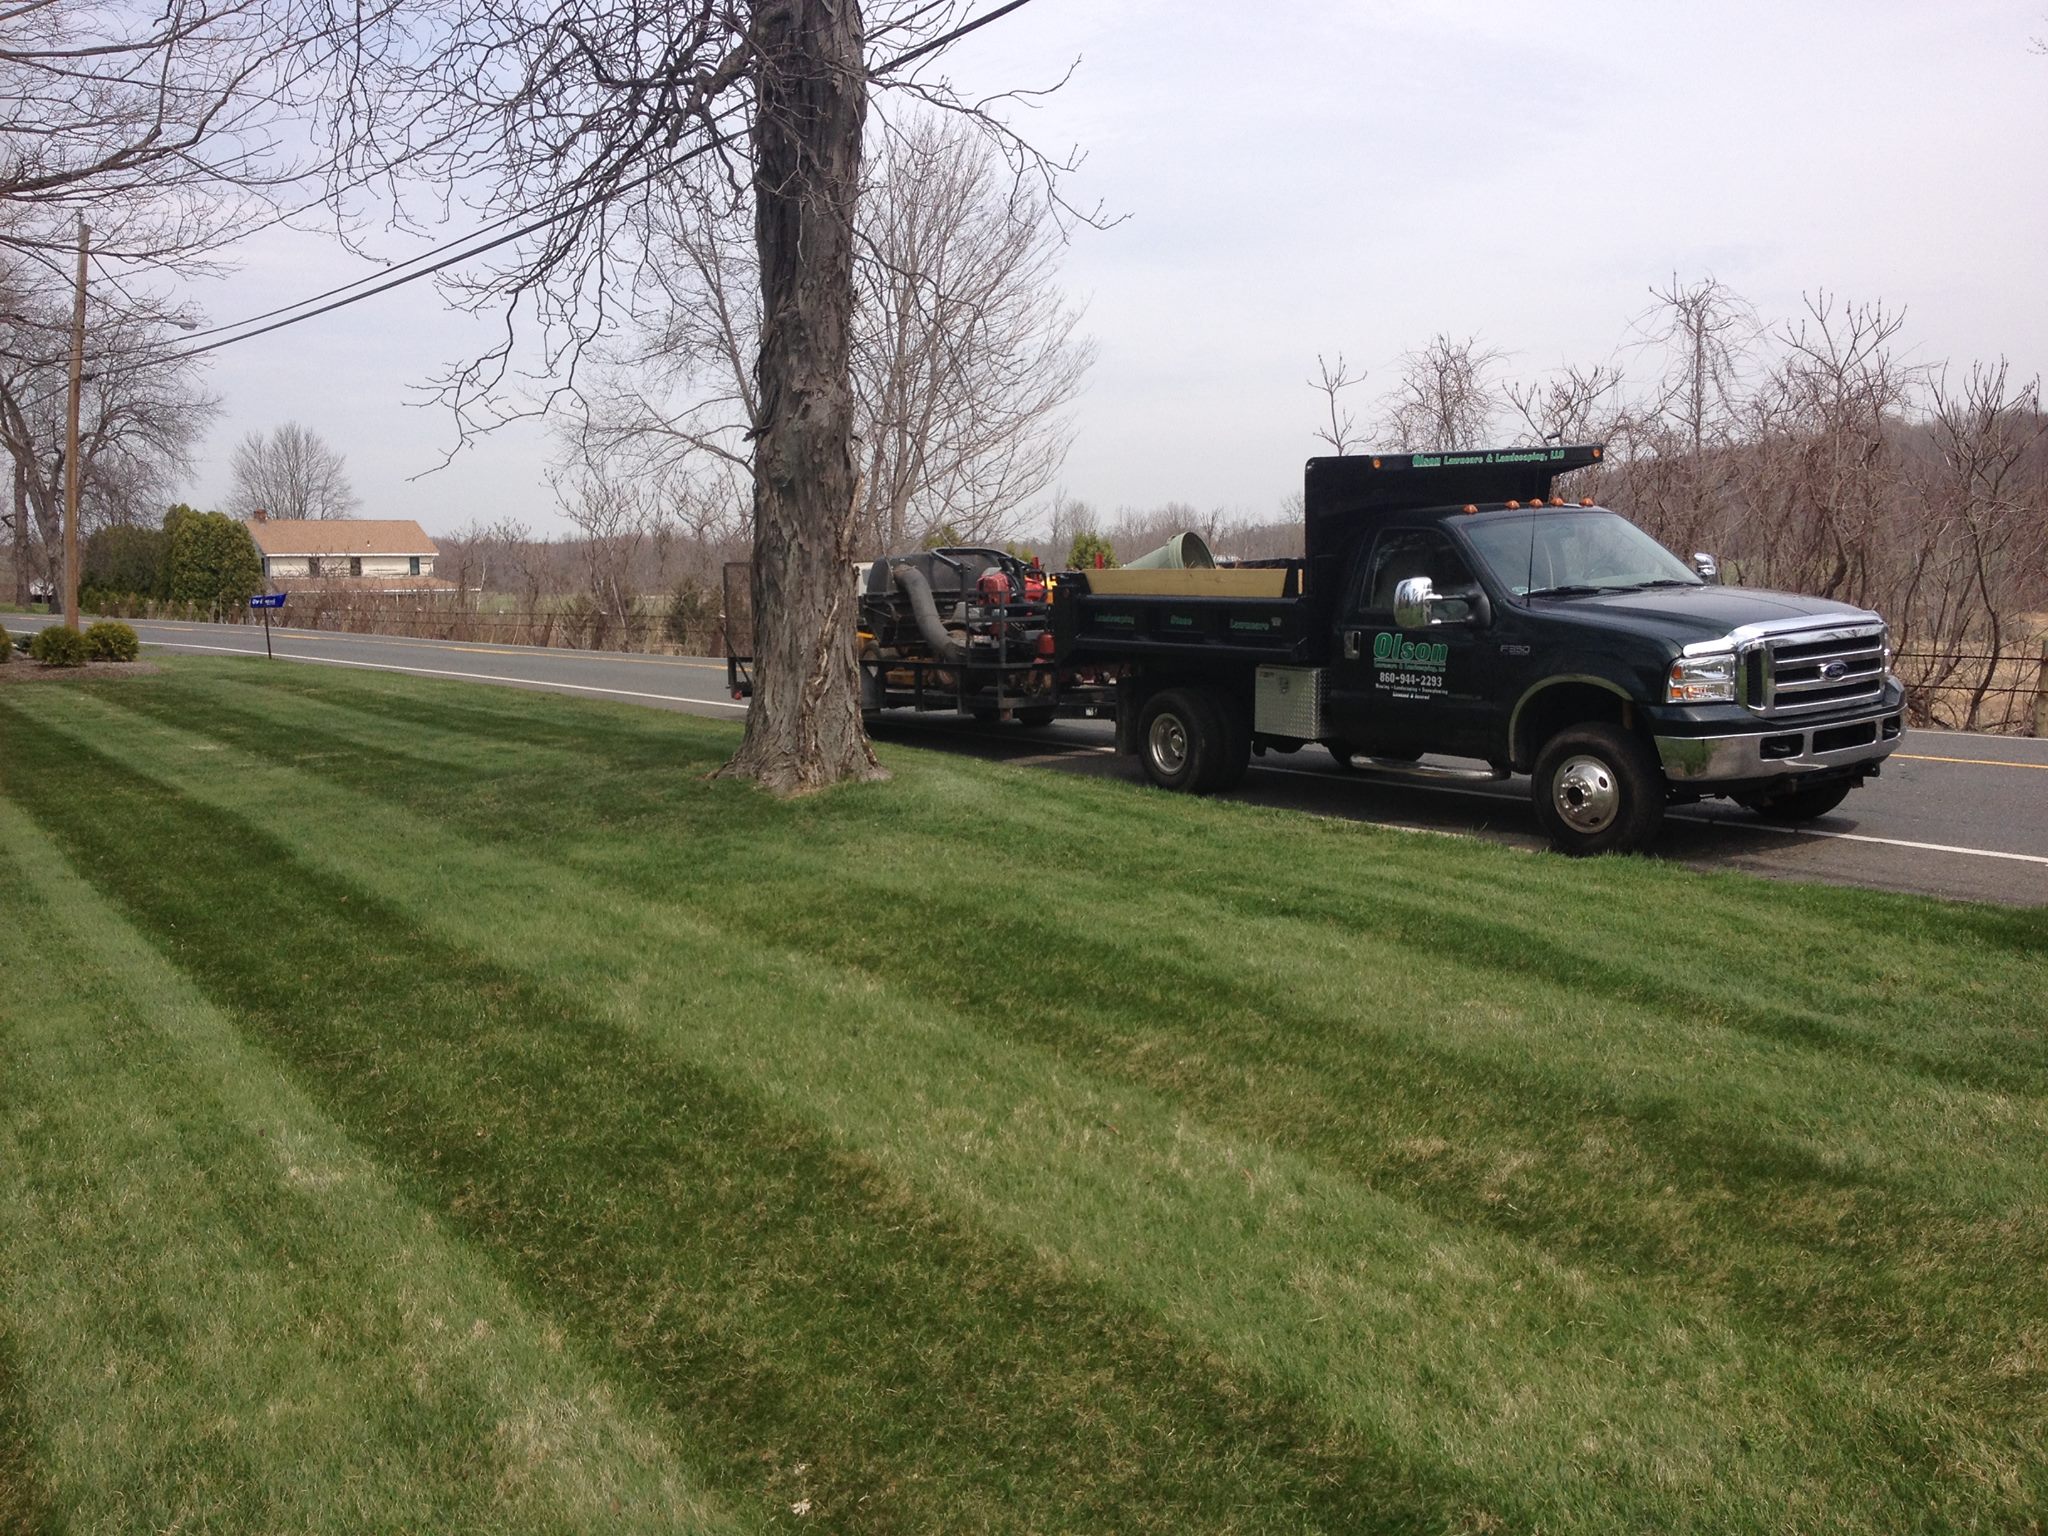 landscaping and yard work - Olson Lawncare and Landscaping Twin Cities Andover